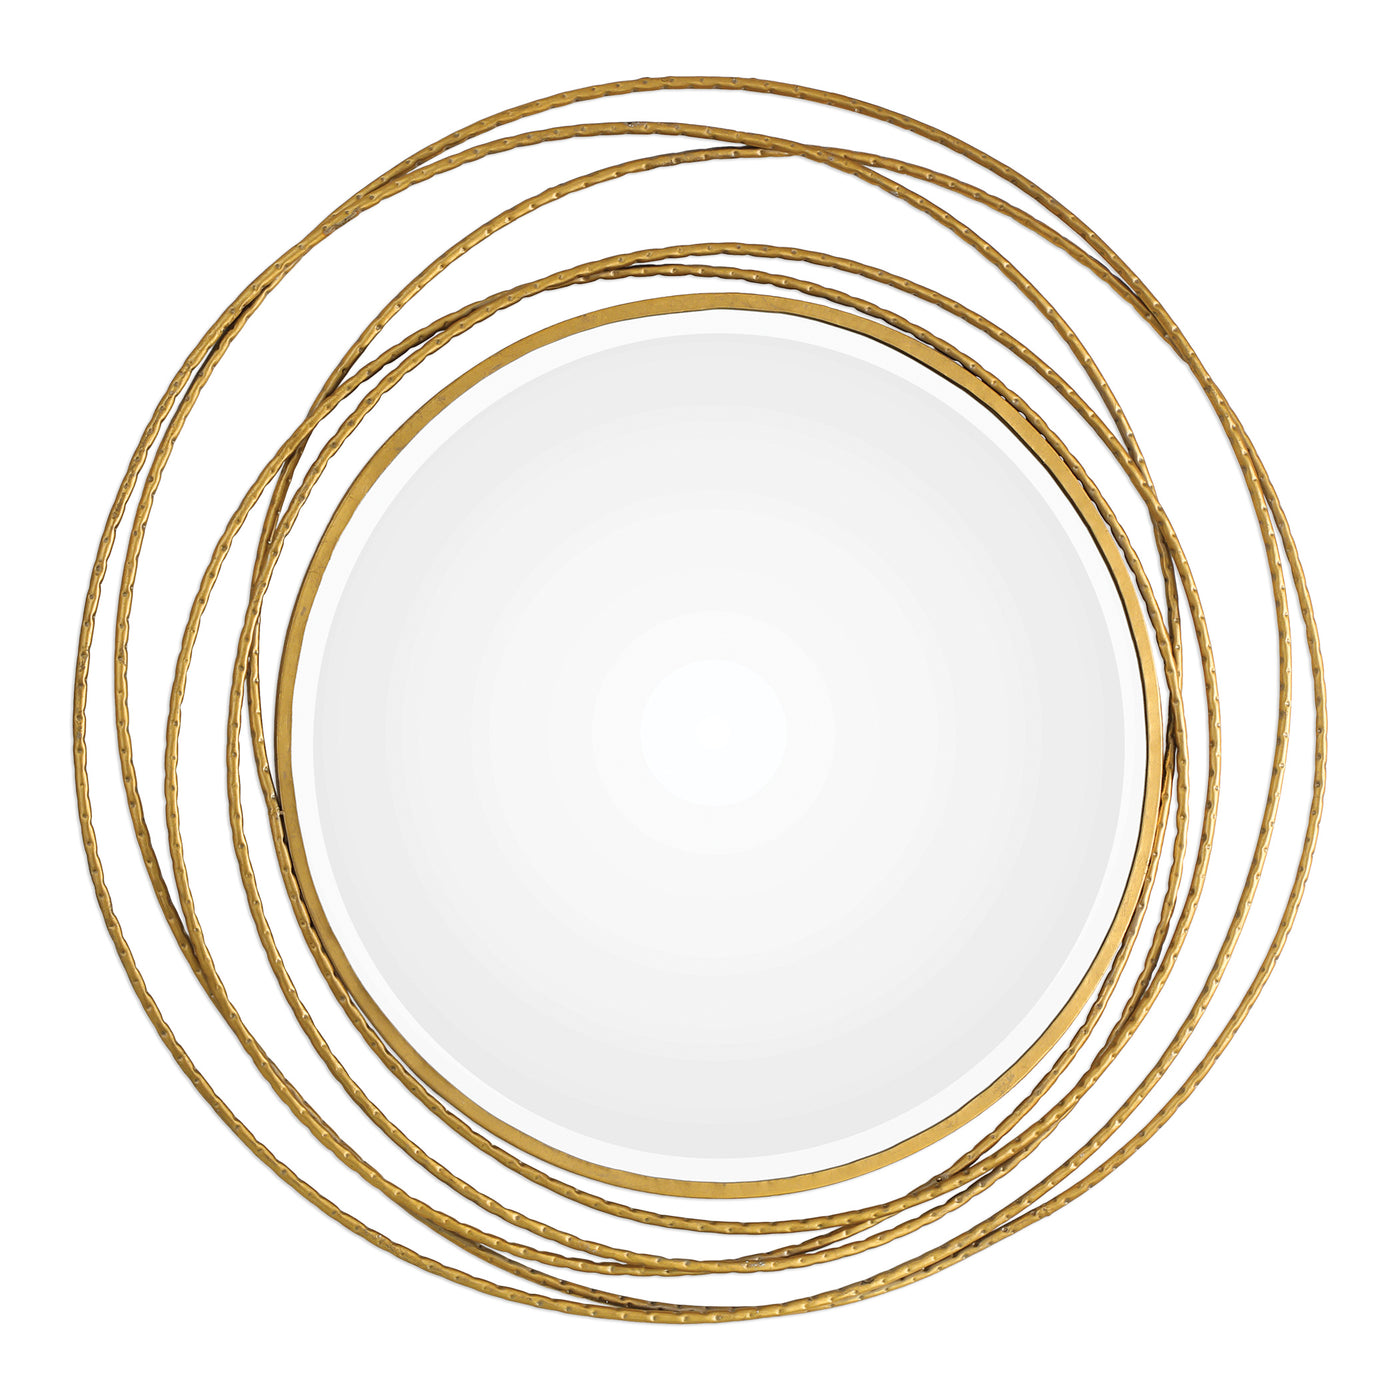 Hand Forged Iron Coils, Finished In A Metallic Gold Leaf, Accented With A Subtle Hammered Texture. Mirror Features A Gener...